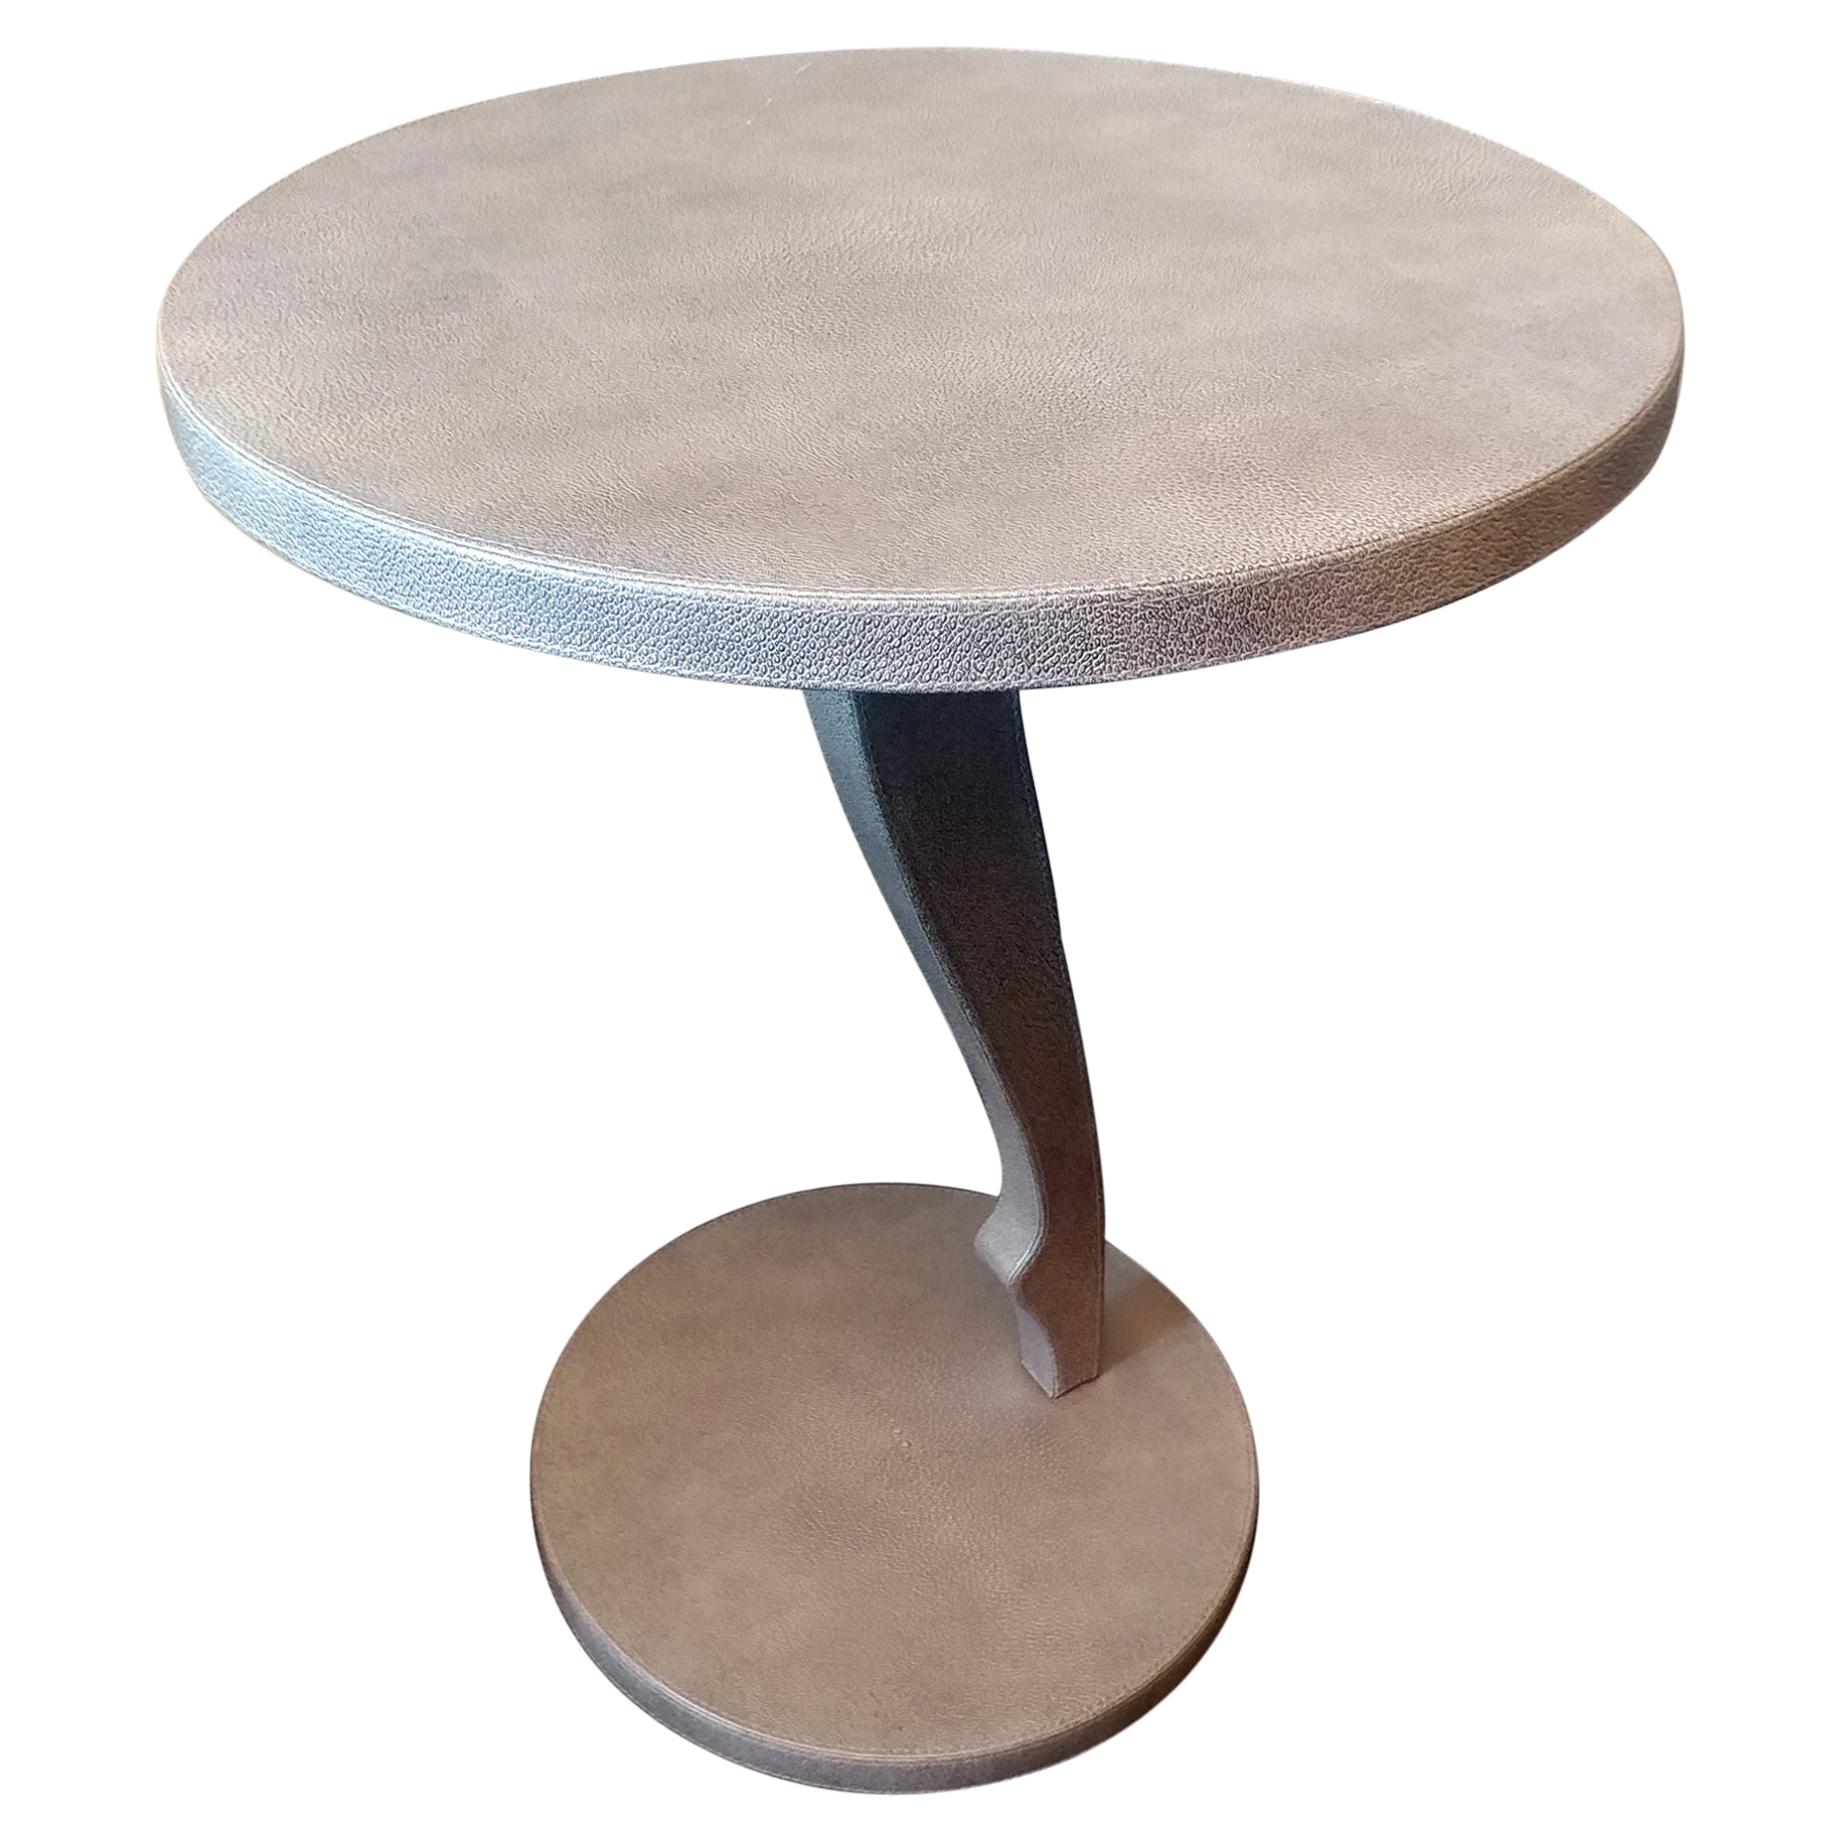 Fendi Casa Sculptural Shagreen Leather Cocktail Table Offered by La Porte For Sale